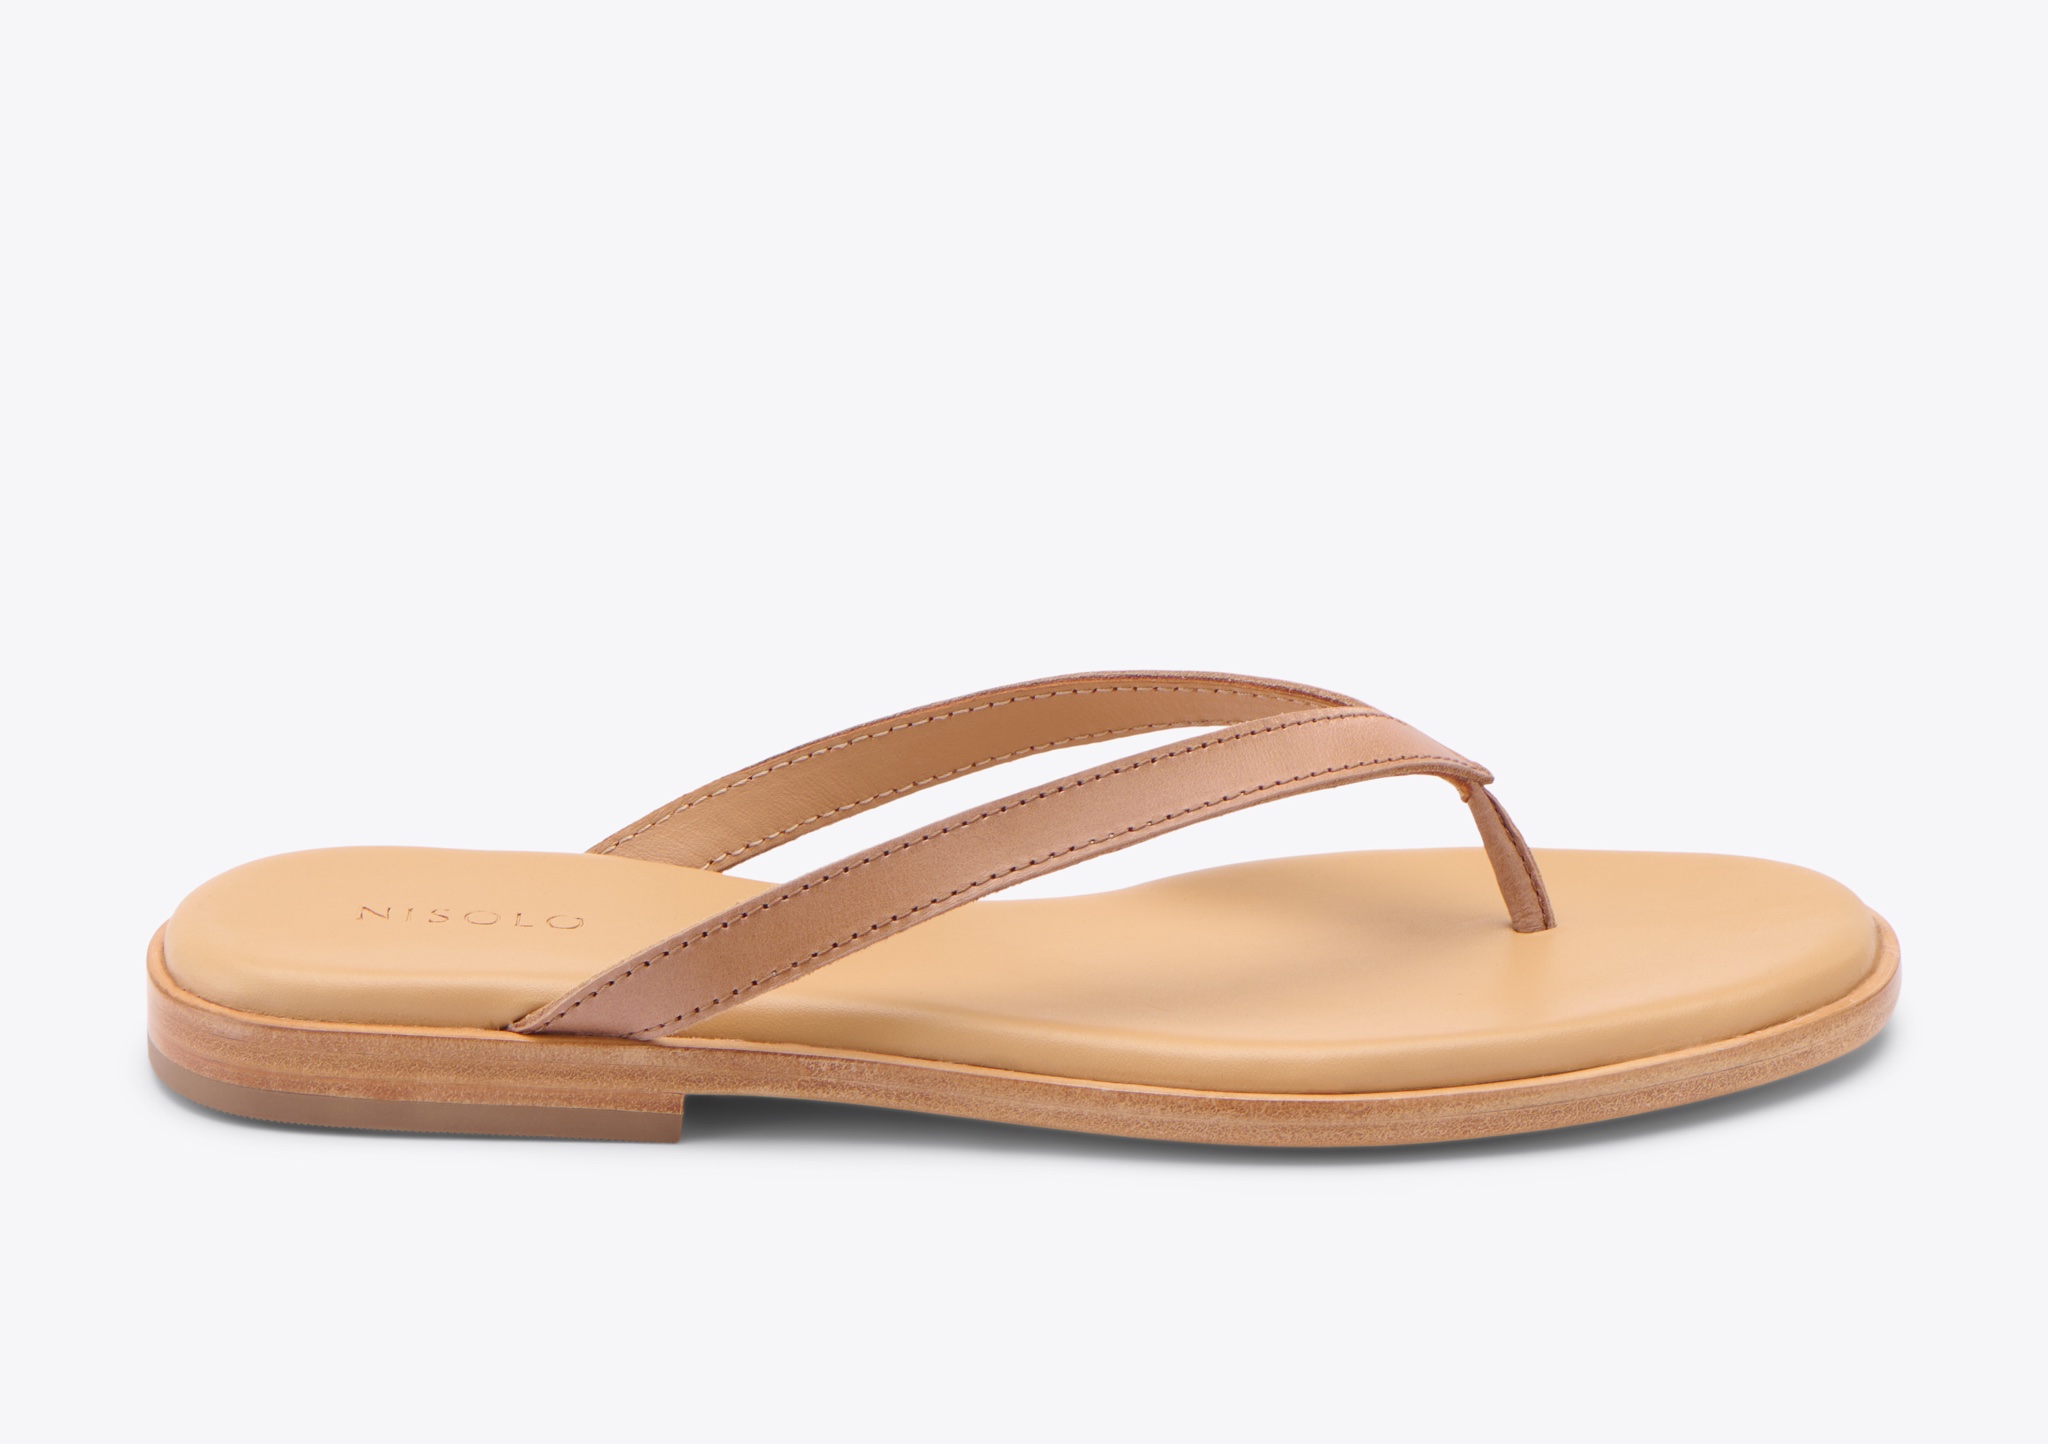 Nisolo Isabel Go-To Flip Flop Almond - Every Nisolo product is built on the foundation of comfort, function, and design. 